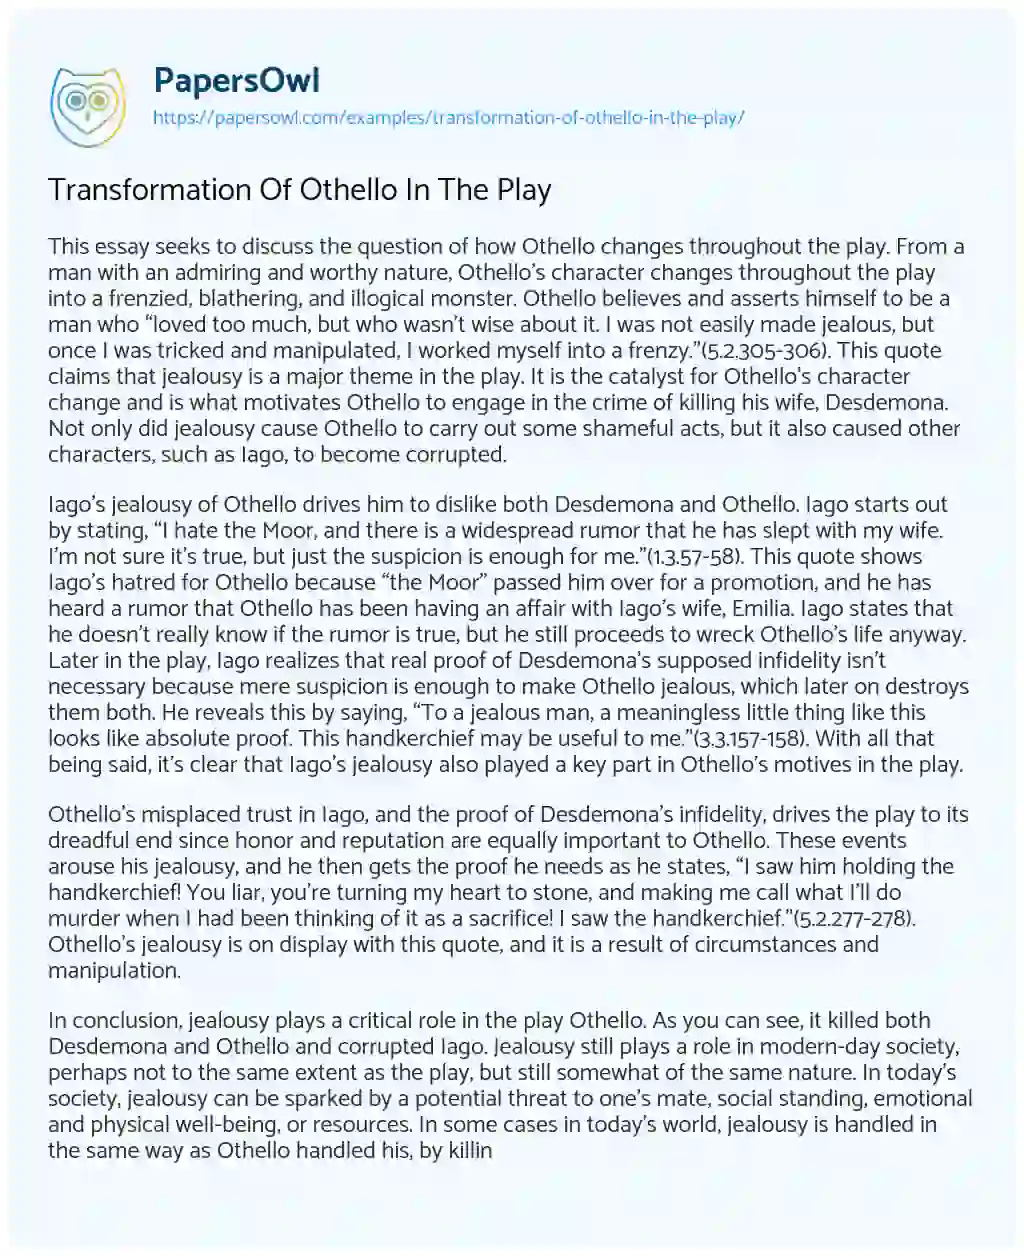 Transformation of Othello in the Play essay